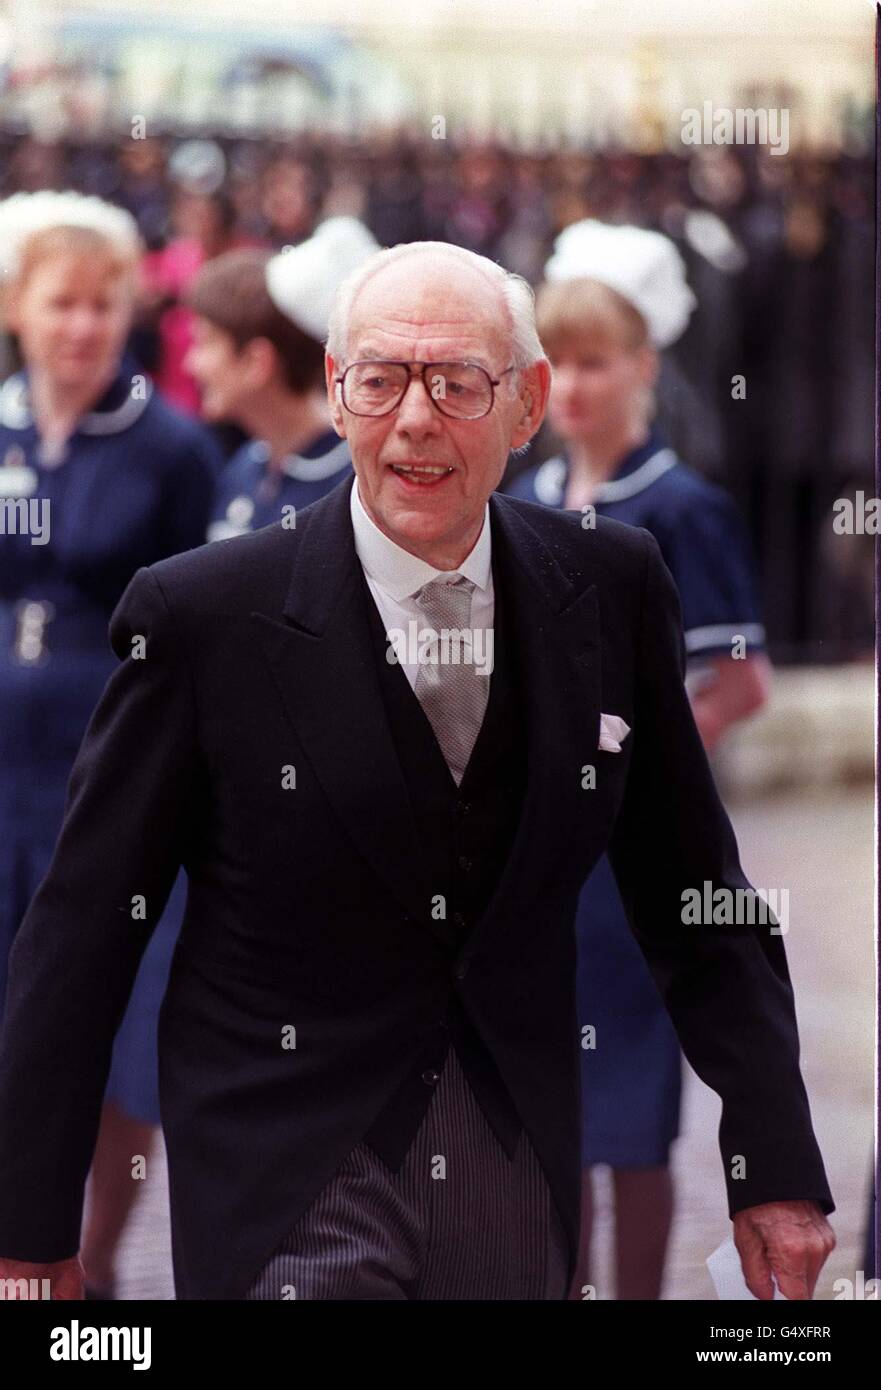 Dennis Thatcher, husband of former British Prime Minister Lady Margaret Thatcher, at Westminster Abbeyin London, for a service to mark the centenary of King Edward VII Hospital for Officers. * 26/06/03 Sir Denis Thatcher died today in the Lister Hospital, London, a spokesman for the family said, He was 88. Stock Photo